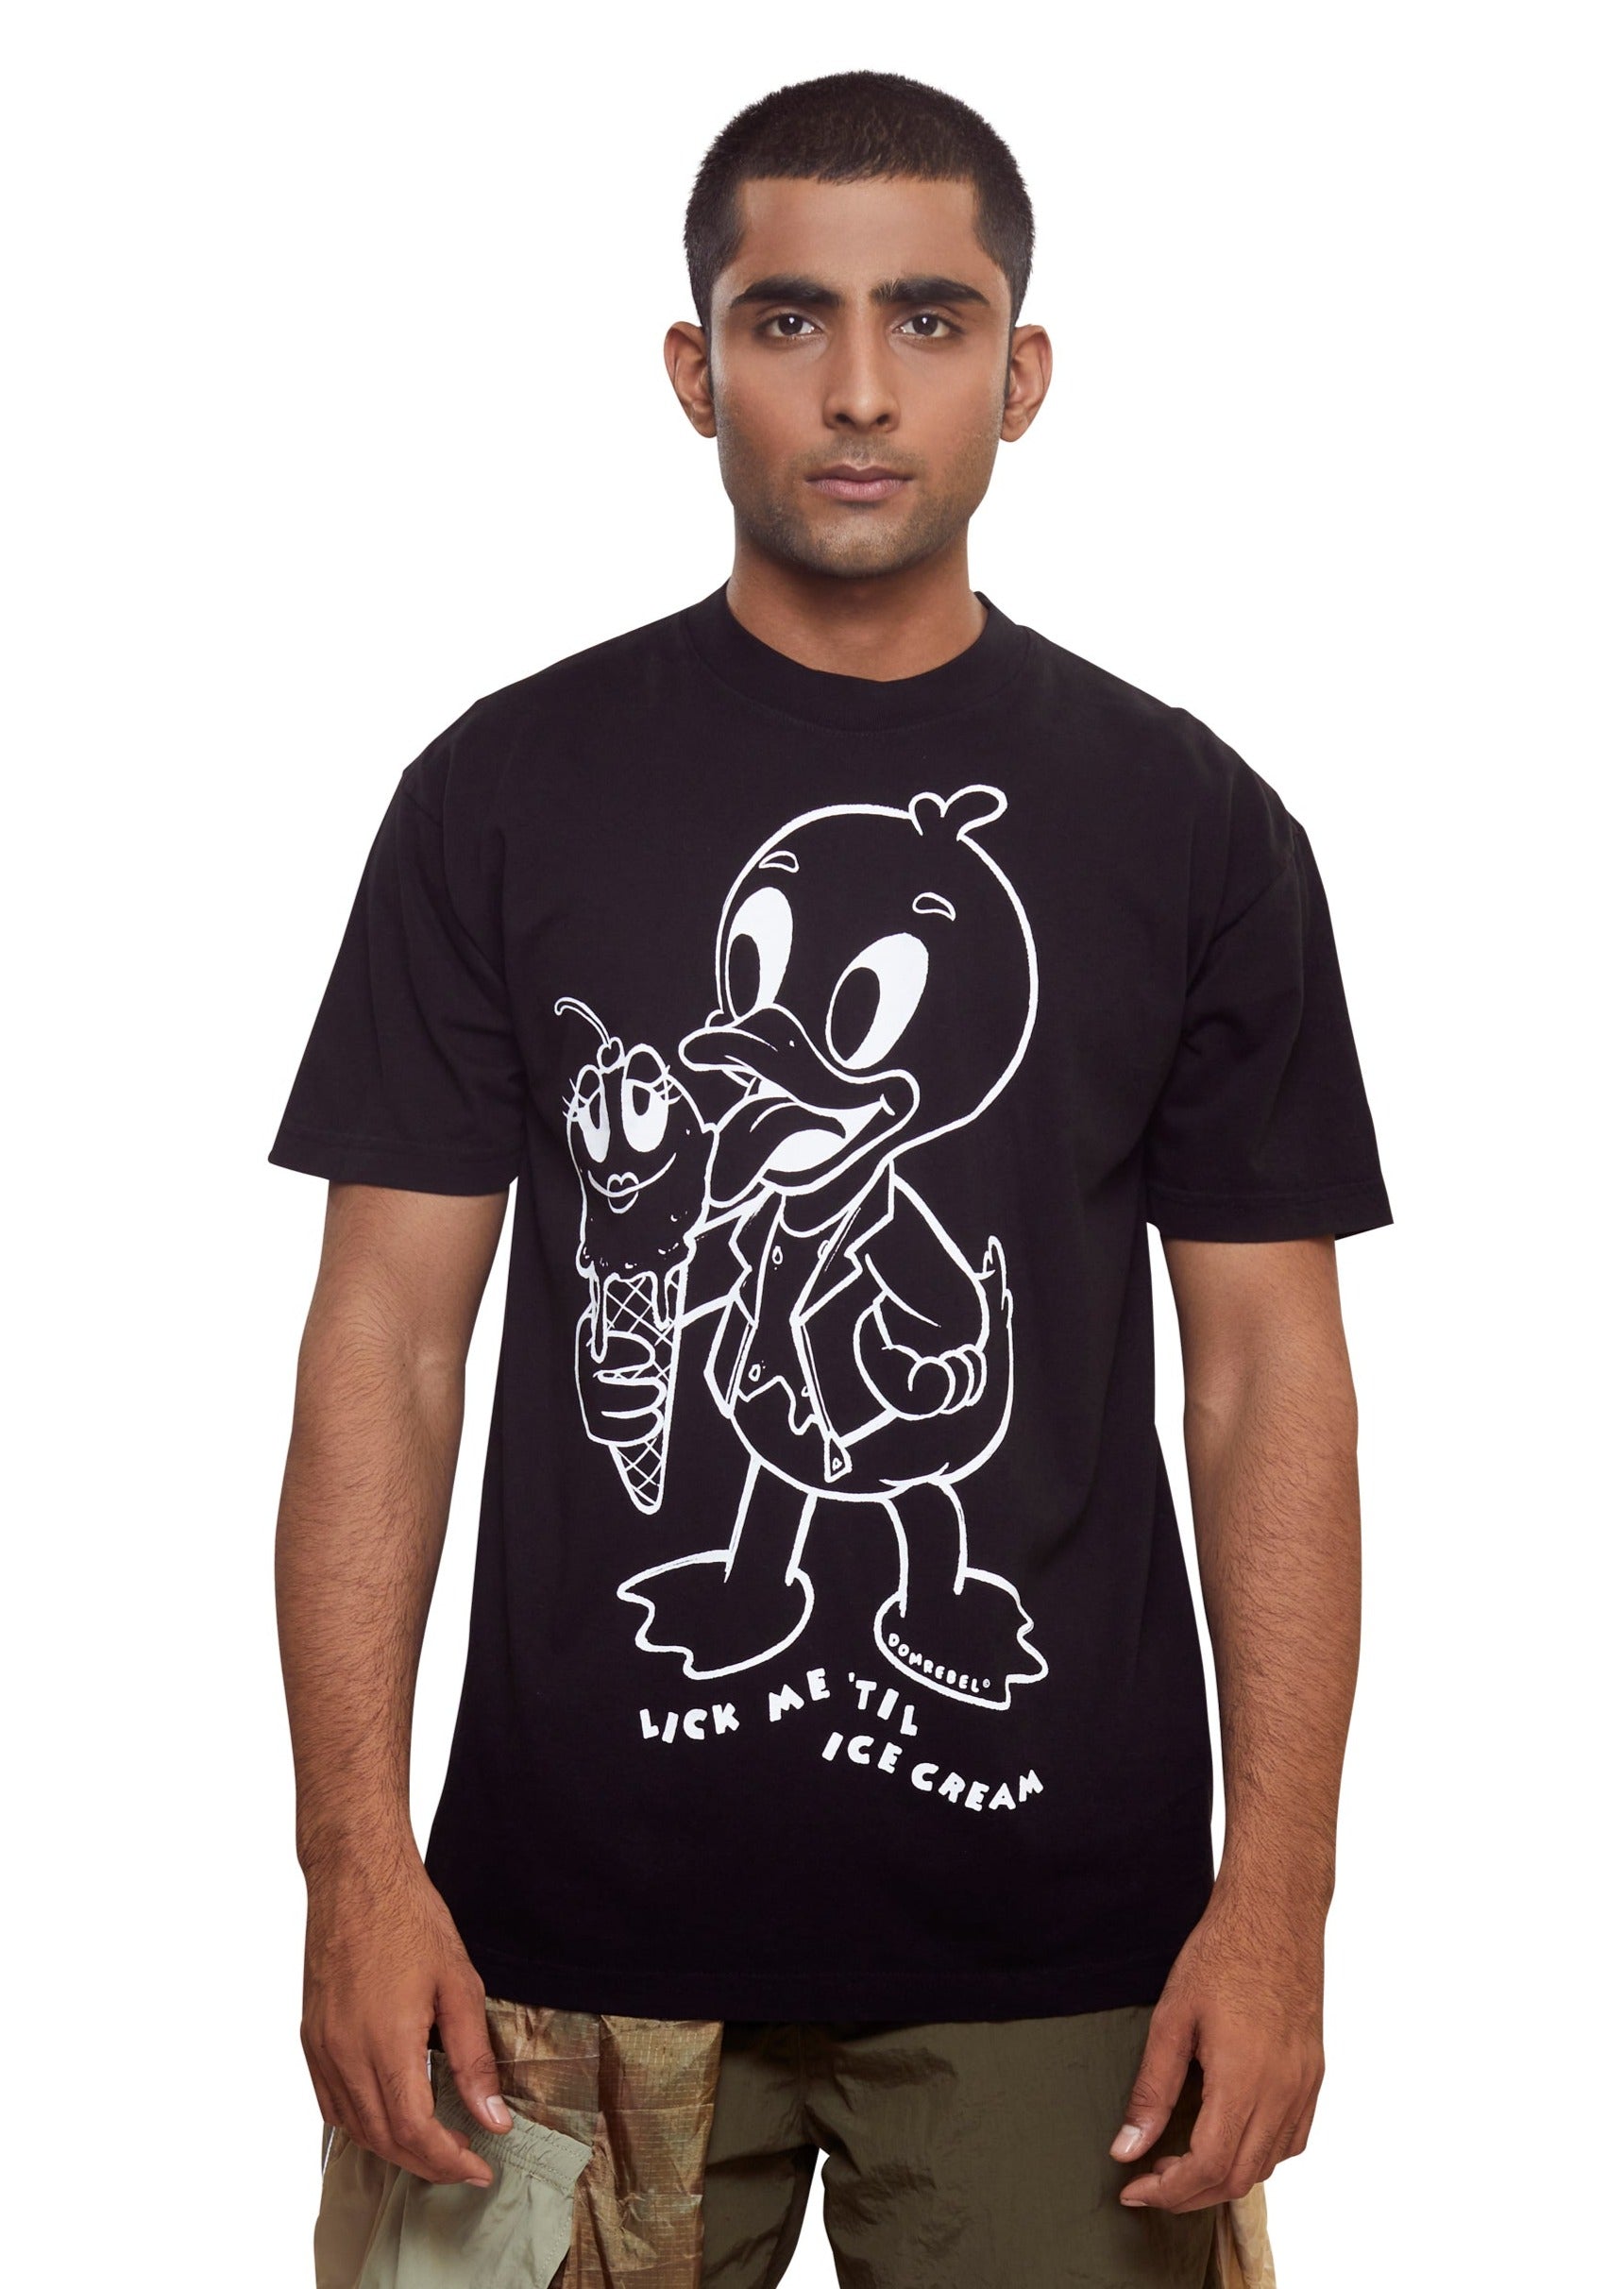 Black Graphic t-shirt by Dom Rebel in a medium weight 100% cotton fabric with the print of a duck eating an ice cream. Fit is regular and relaxed